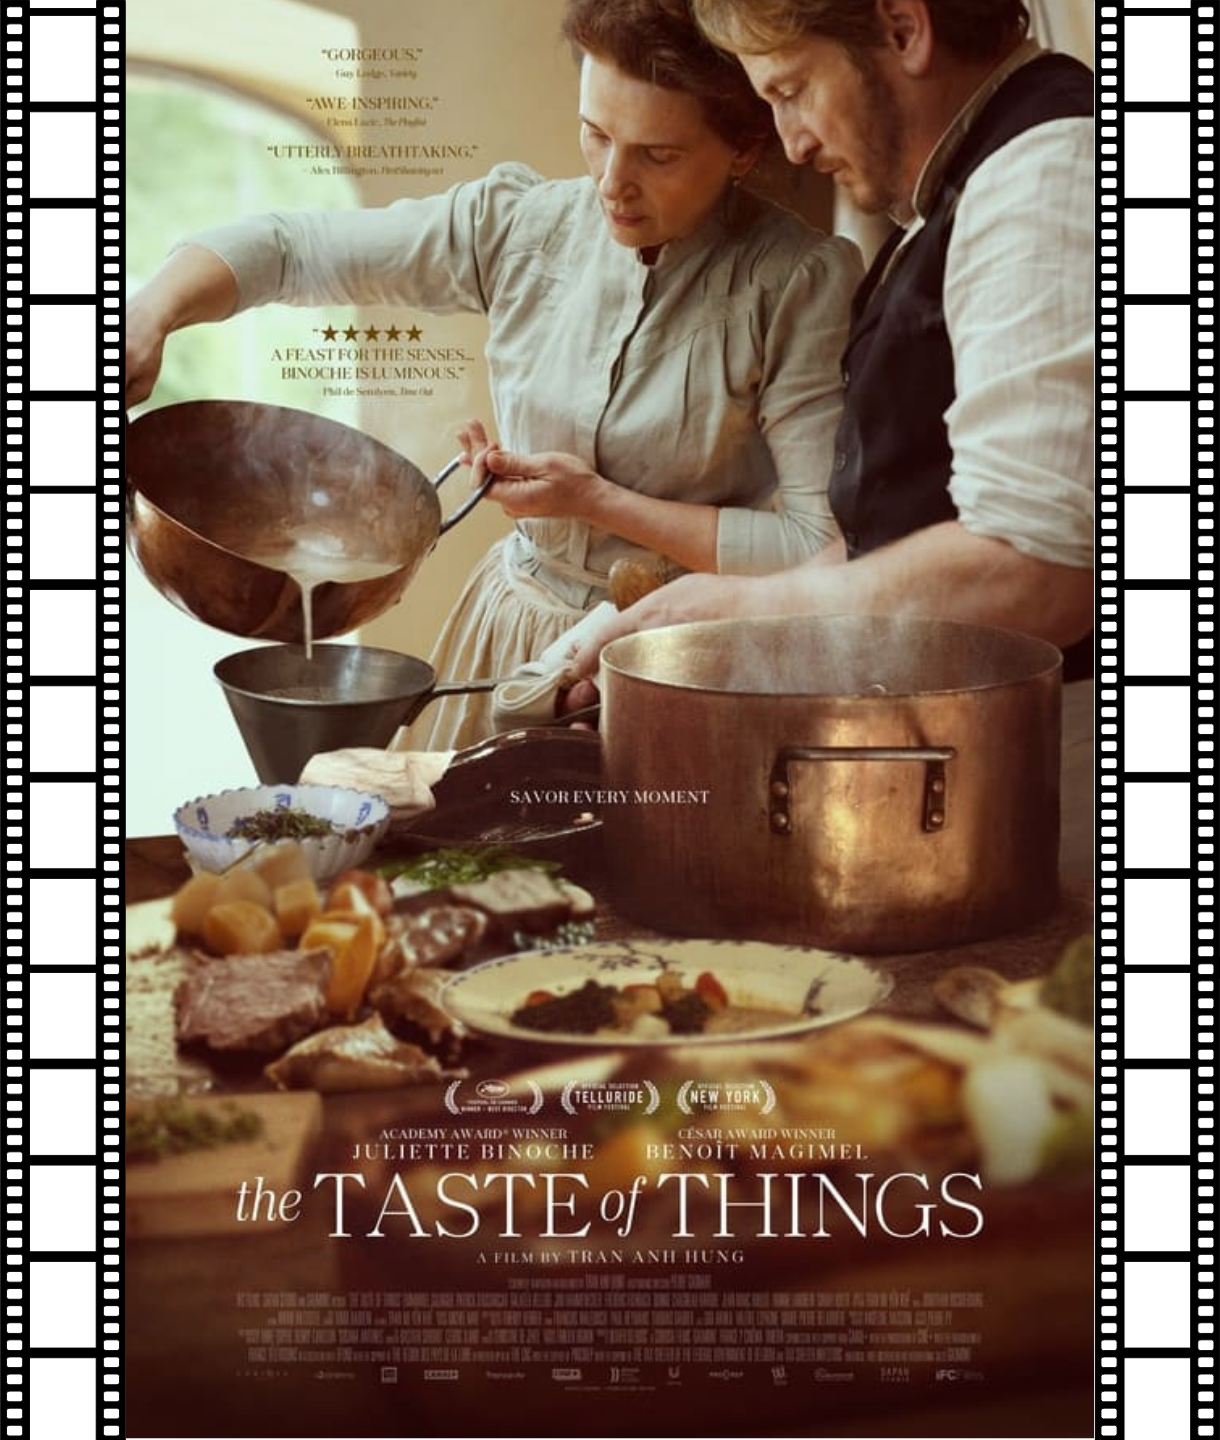 The Taste Of Things (12A)